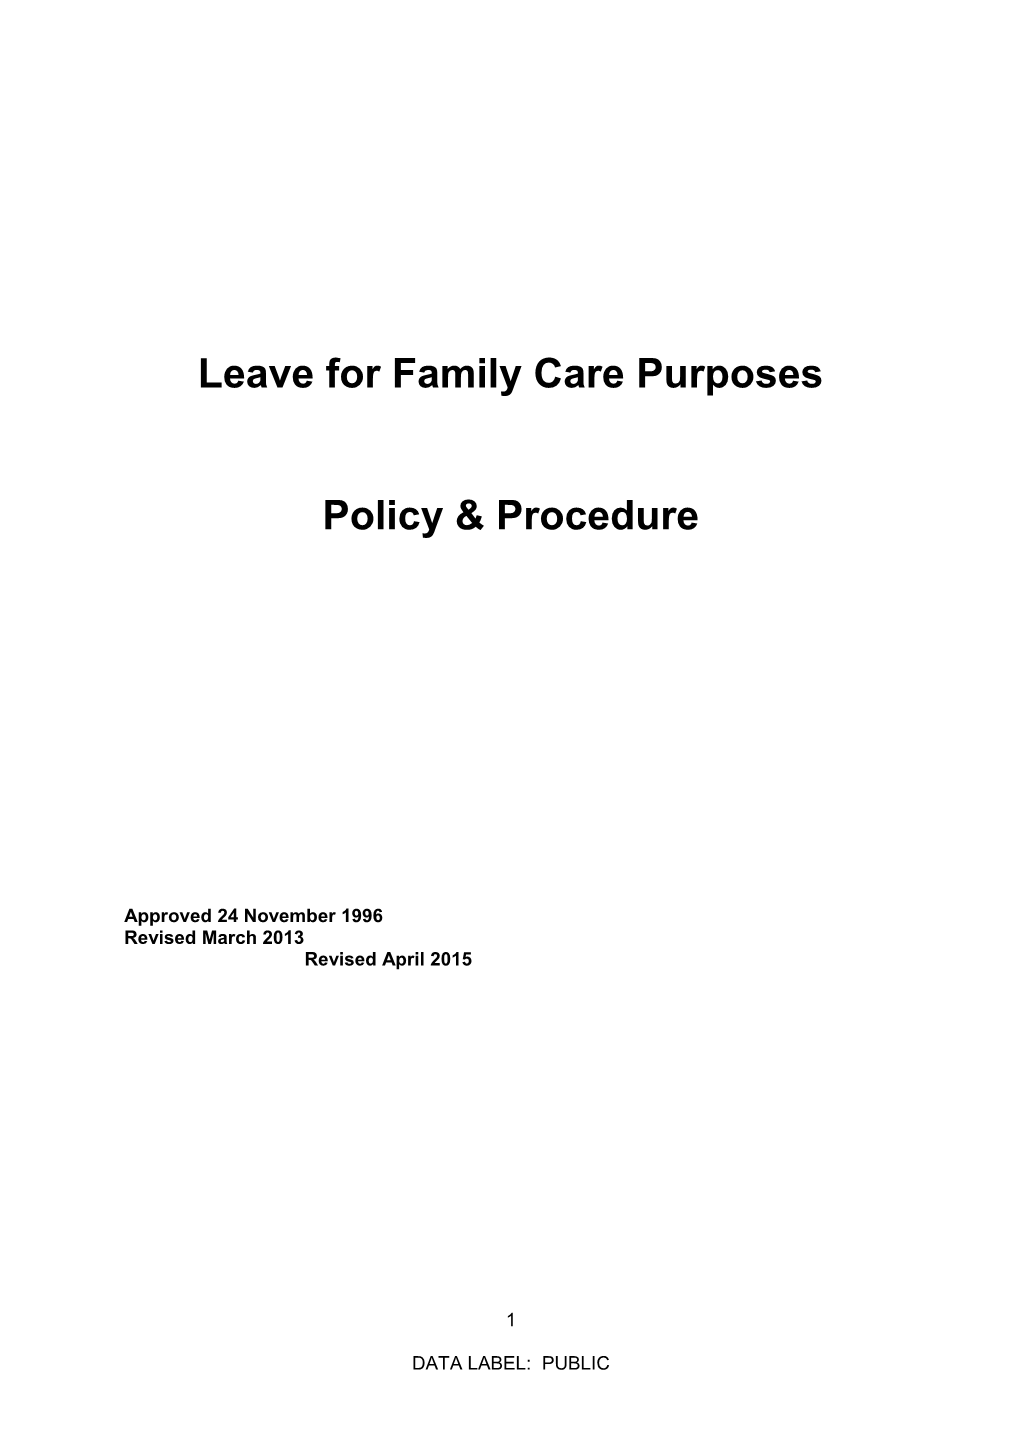 Leave for Family Care Purposes Policy & Procedure s1